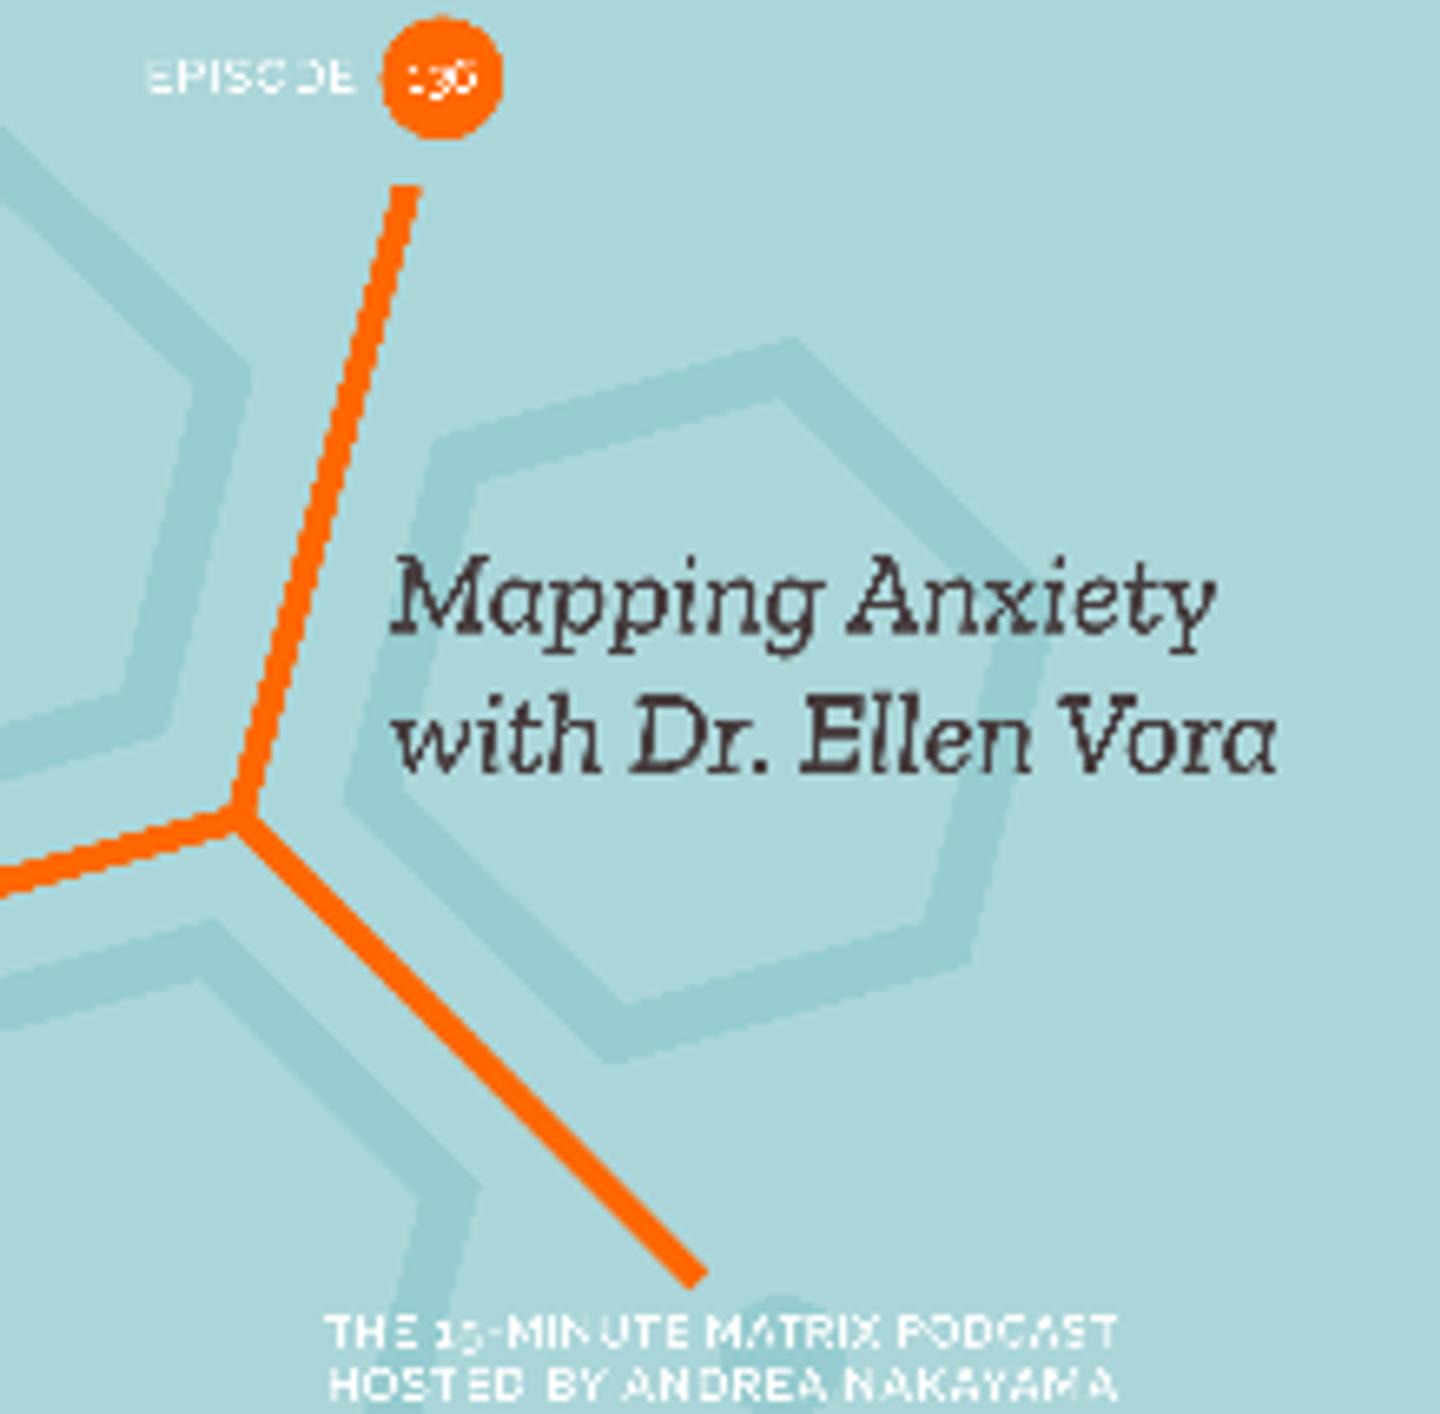  Mapping Anxiety with Dr. Ellen Vora